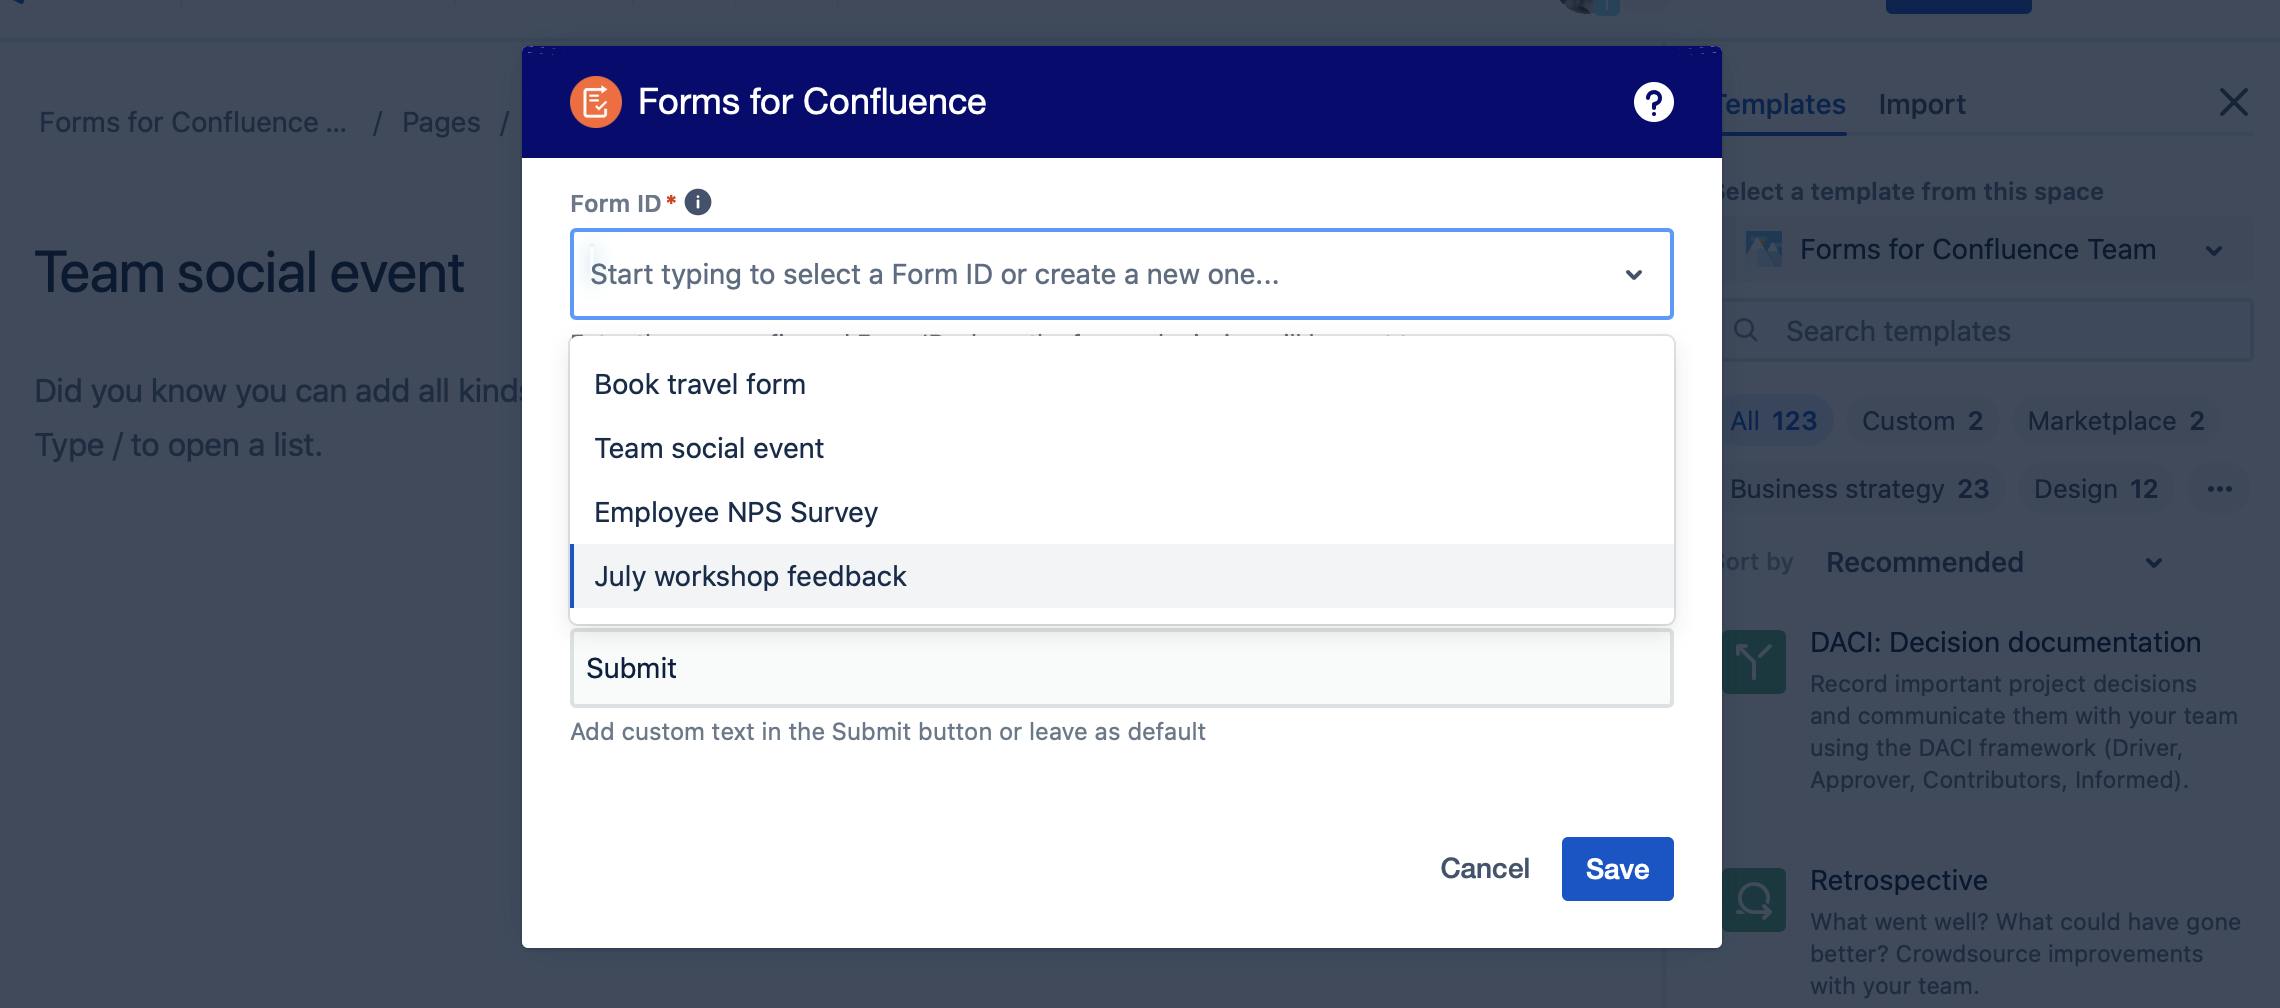 Selecting a form from a drop down list in Confluence